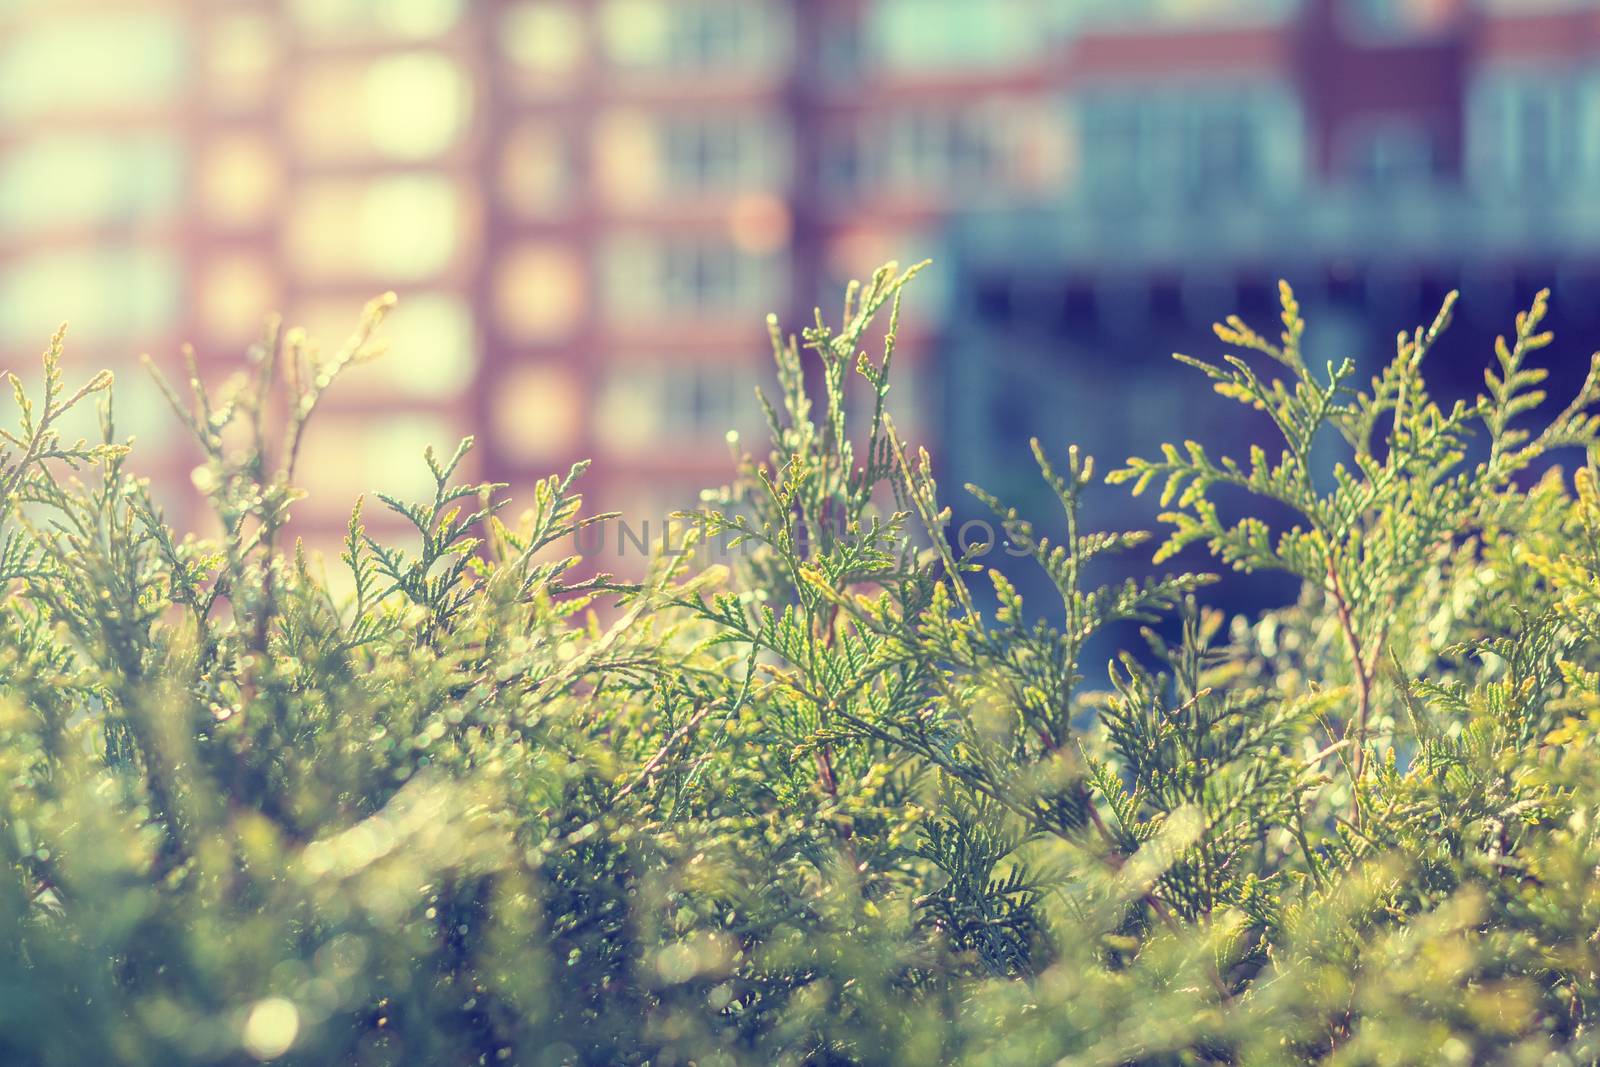 Thuja foliage in the sunlight.  Multistoried building is out of focus. Urban background. Shallow depth of field, bokeh